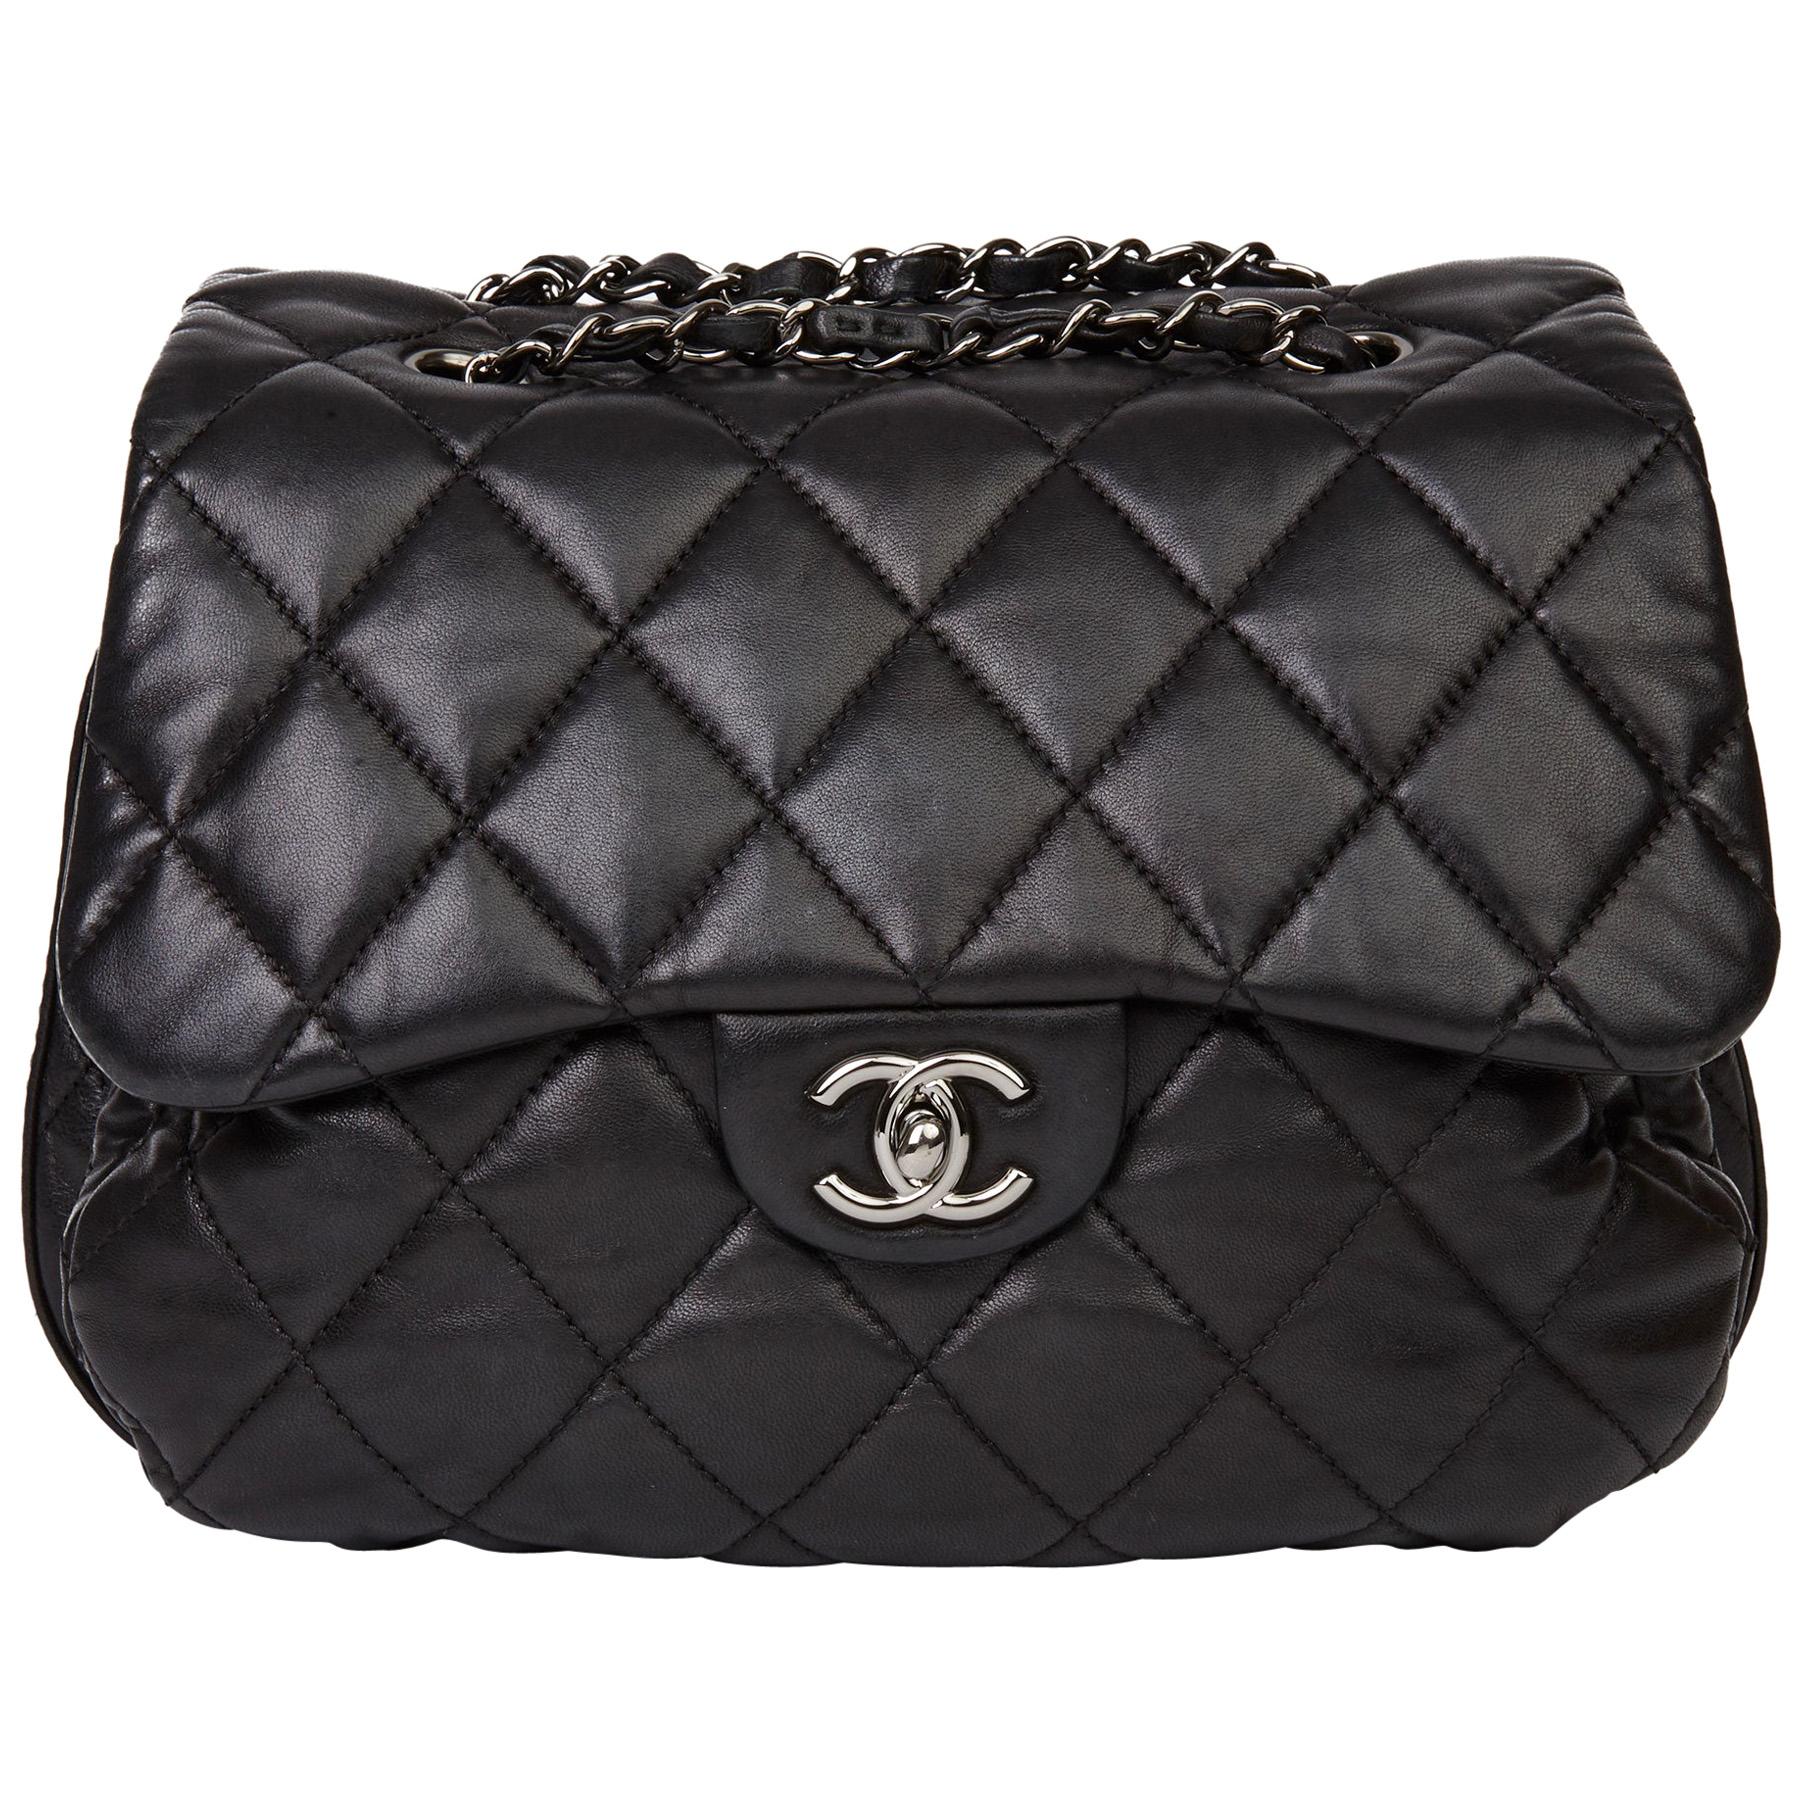 2011 Chanel Black Quilted Lambskin Triple Compartment Classic Single Flap Bag